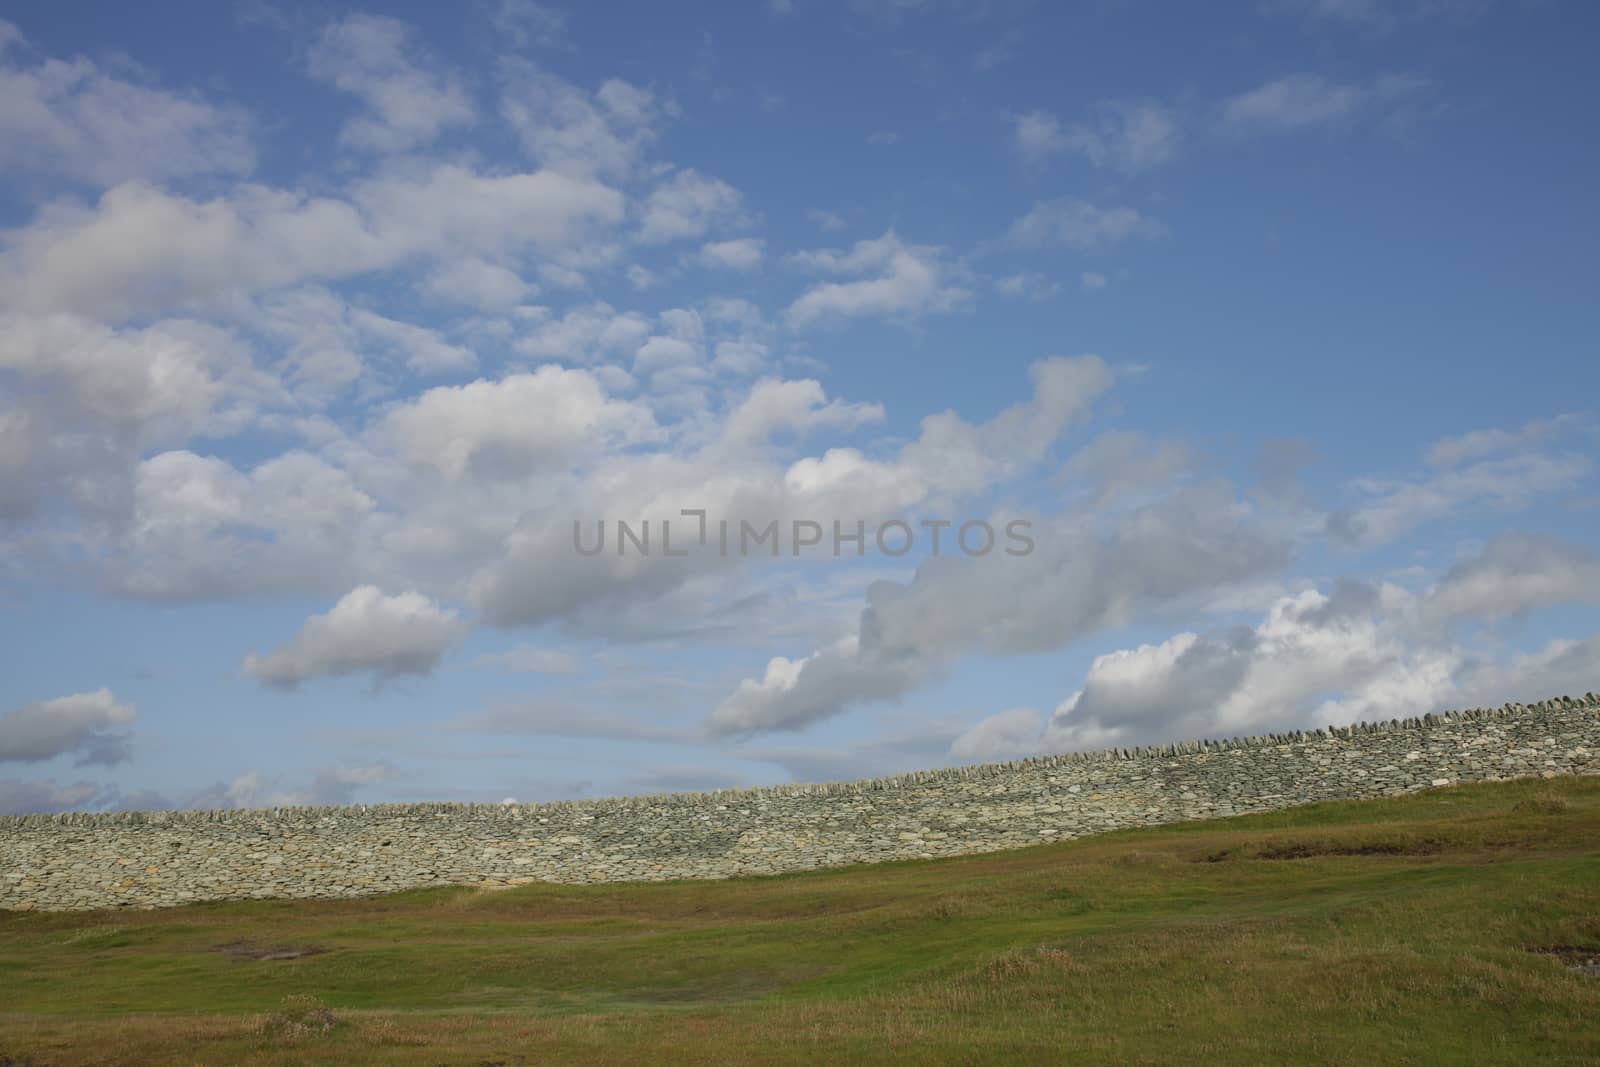 Green grass leads to an old dry stone wall built from white stone with a blue cloud sky in the distance.